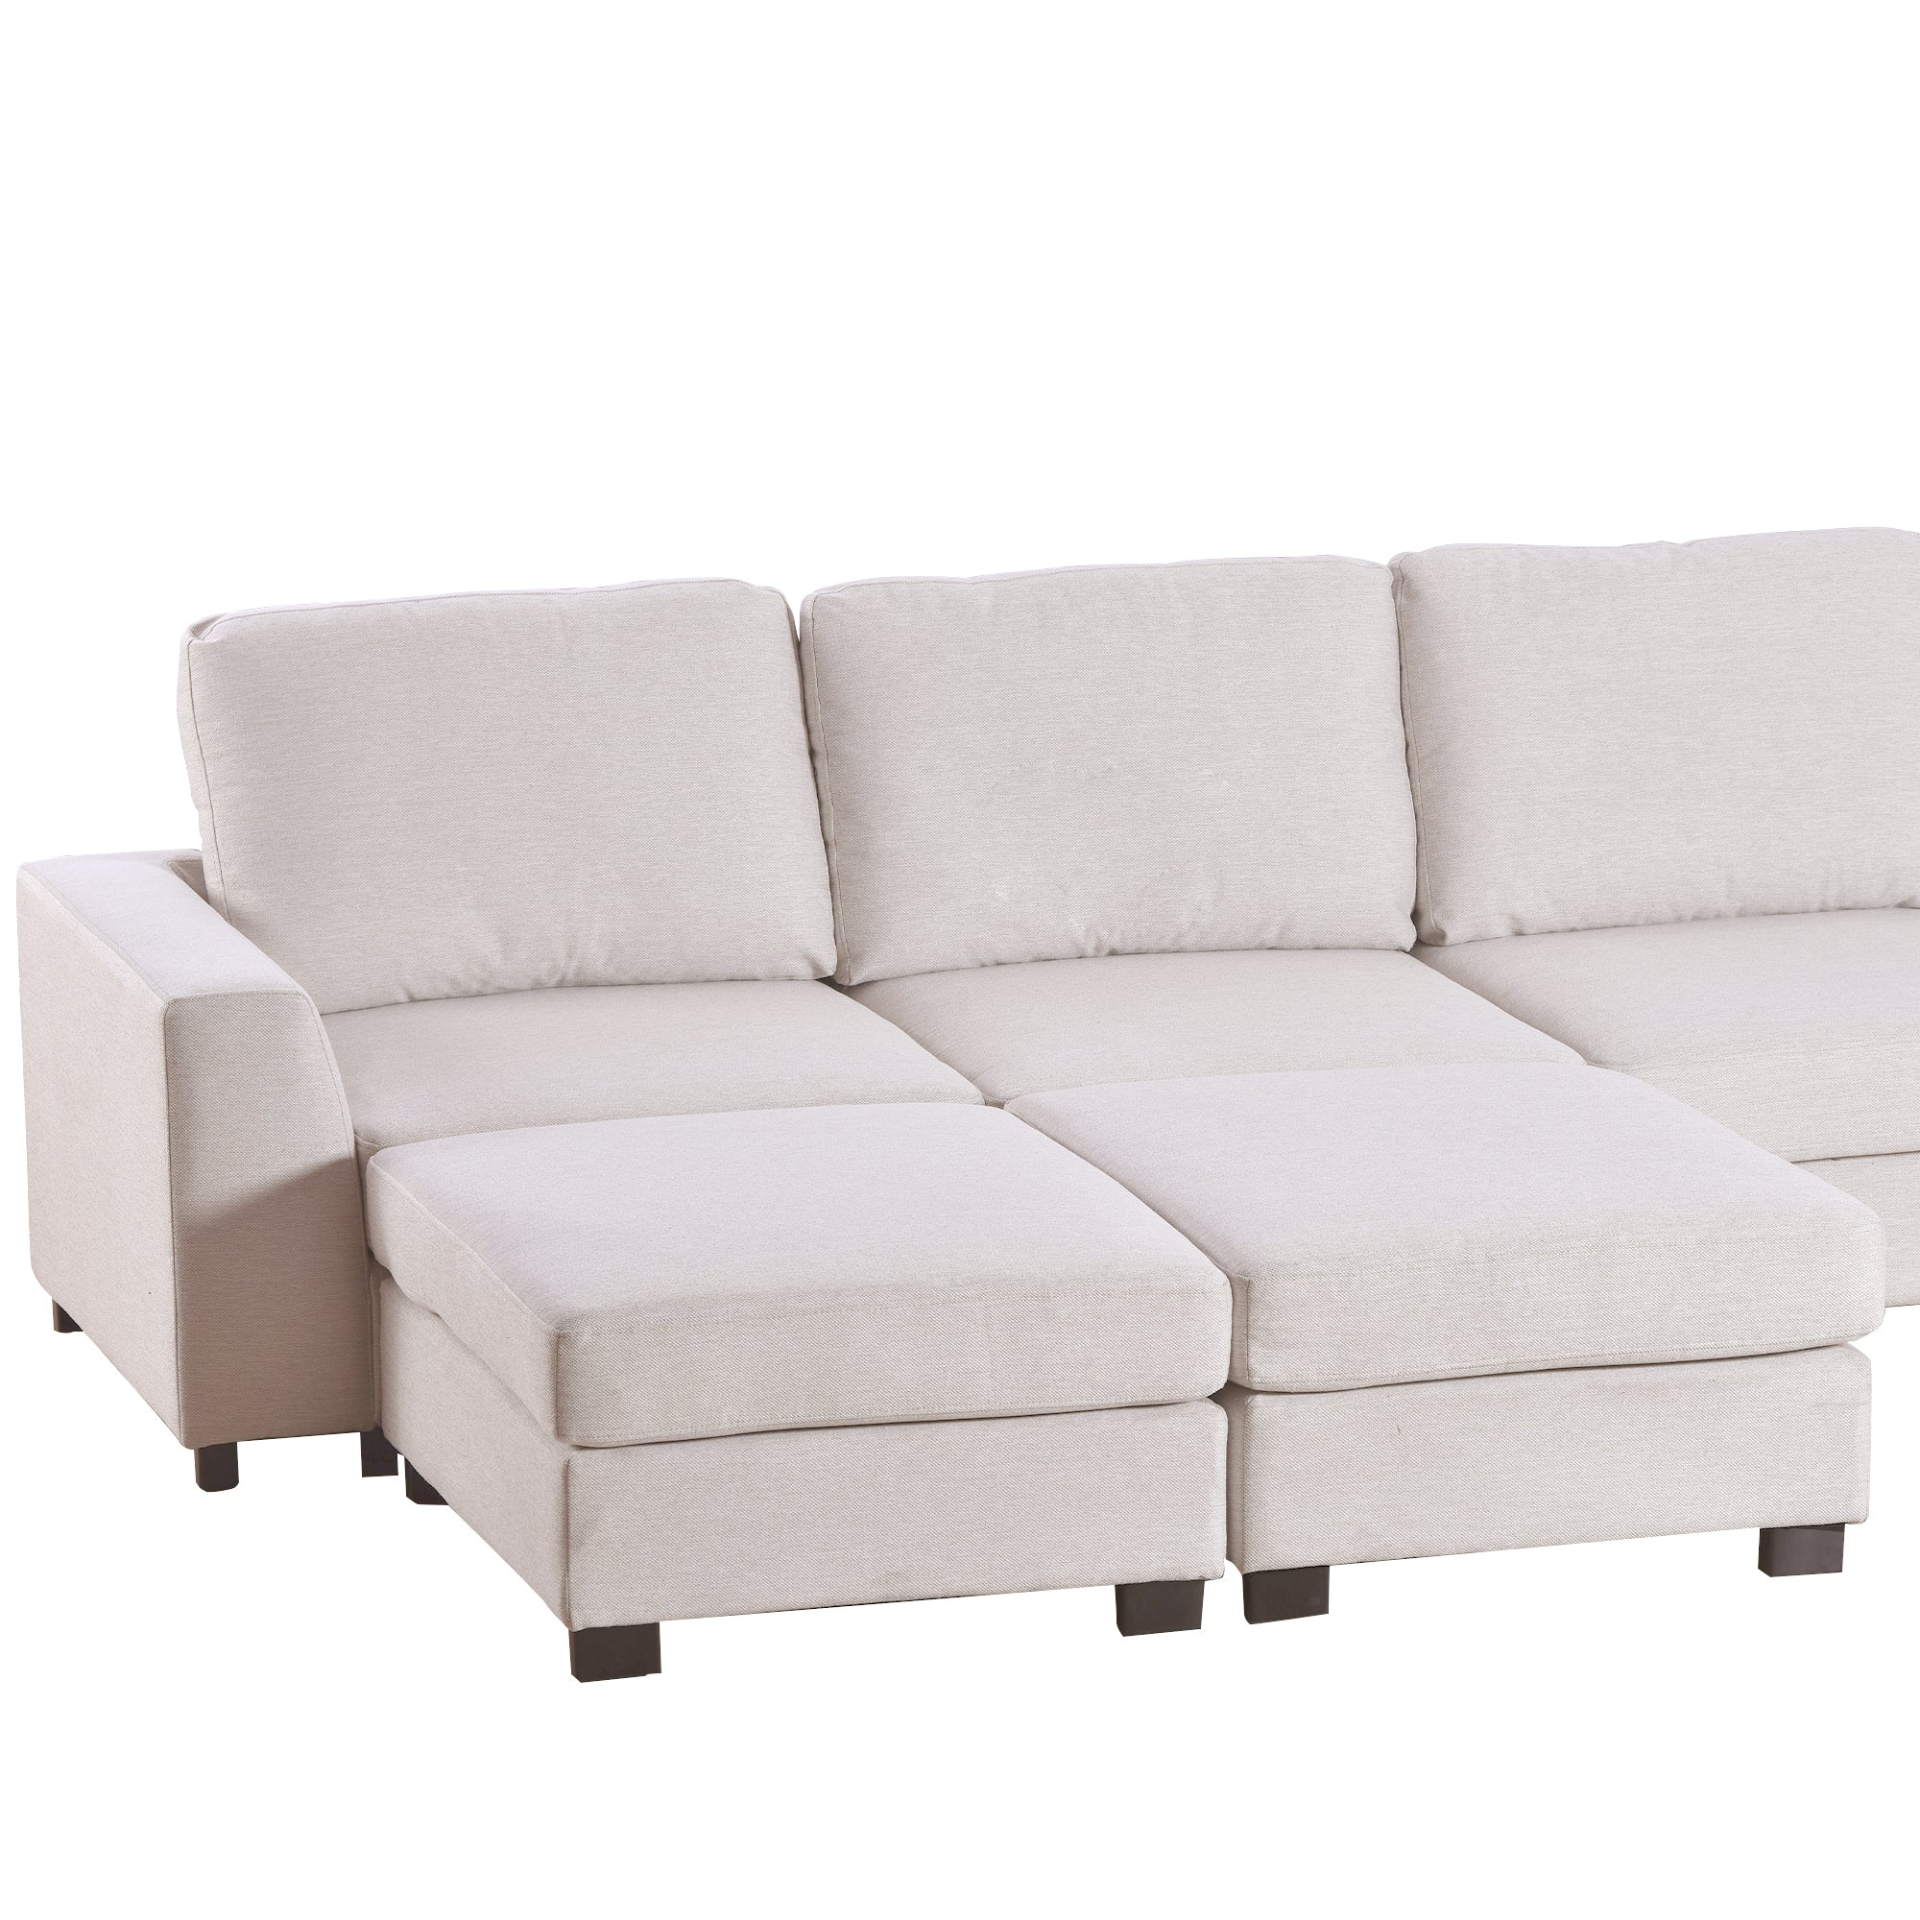 3 Pieces U shaped Sofa with Removable Ottomans - 33943183_large_d5cb81bf-6d1a-4533-8609-5b47ac8c5ffe